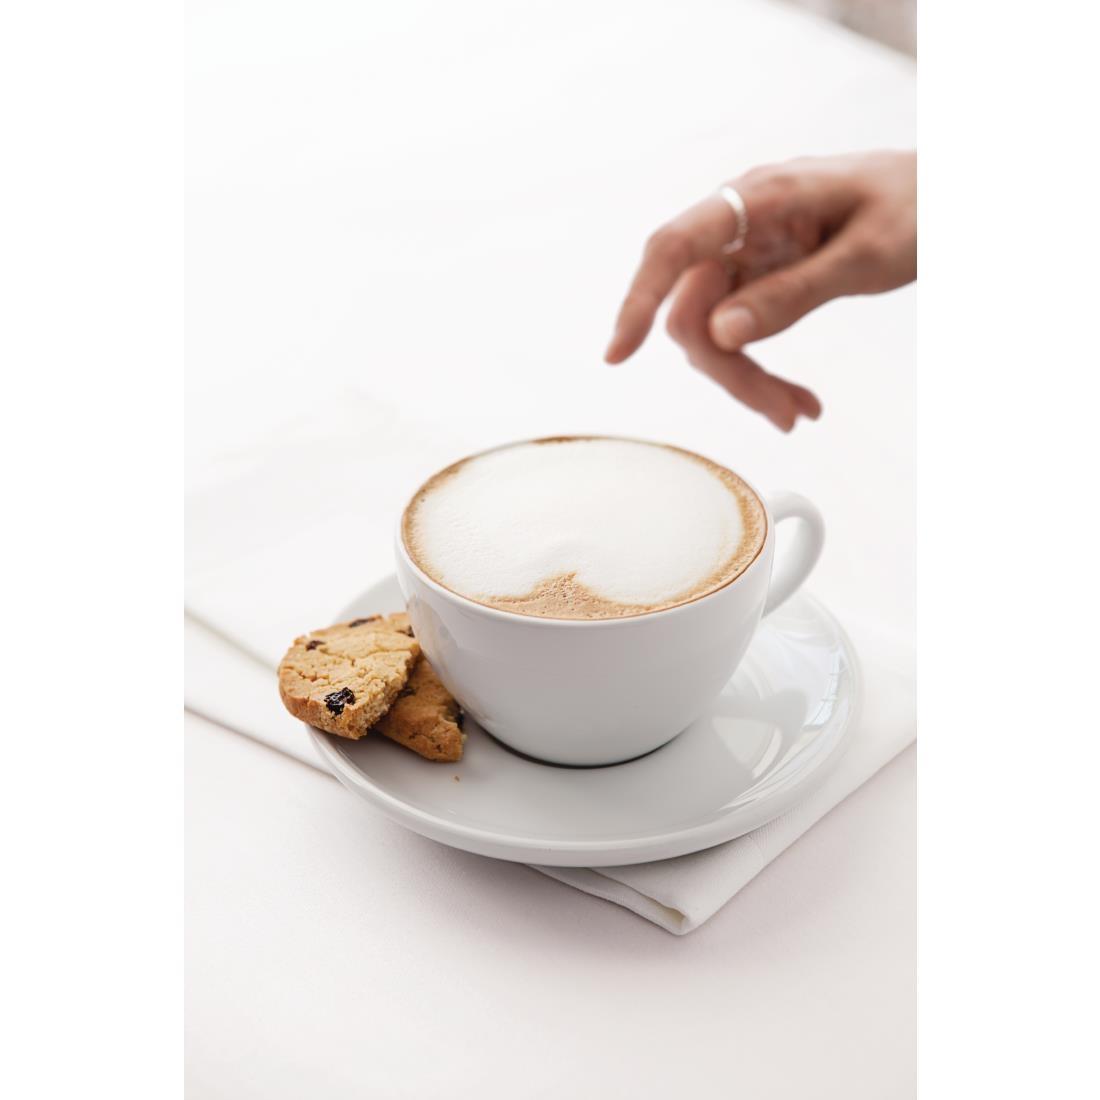 Royal Porcelain Classic White Breakfast Cups 300ml (Pack of 12) - CG022  - 4